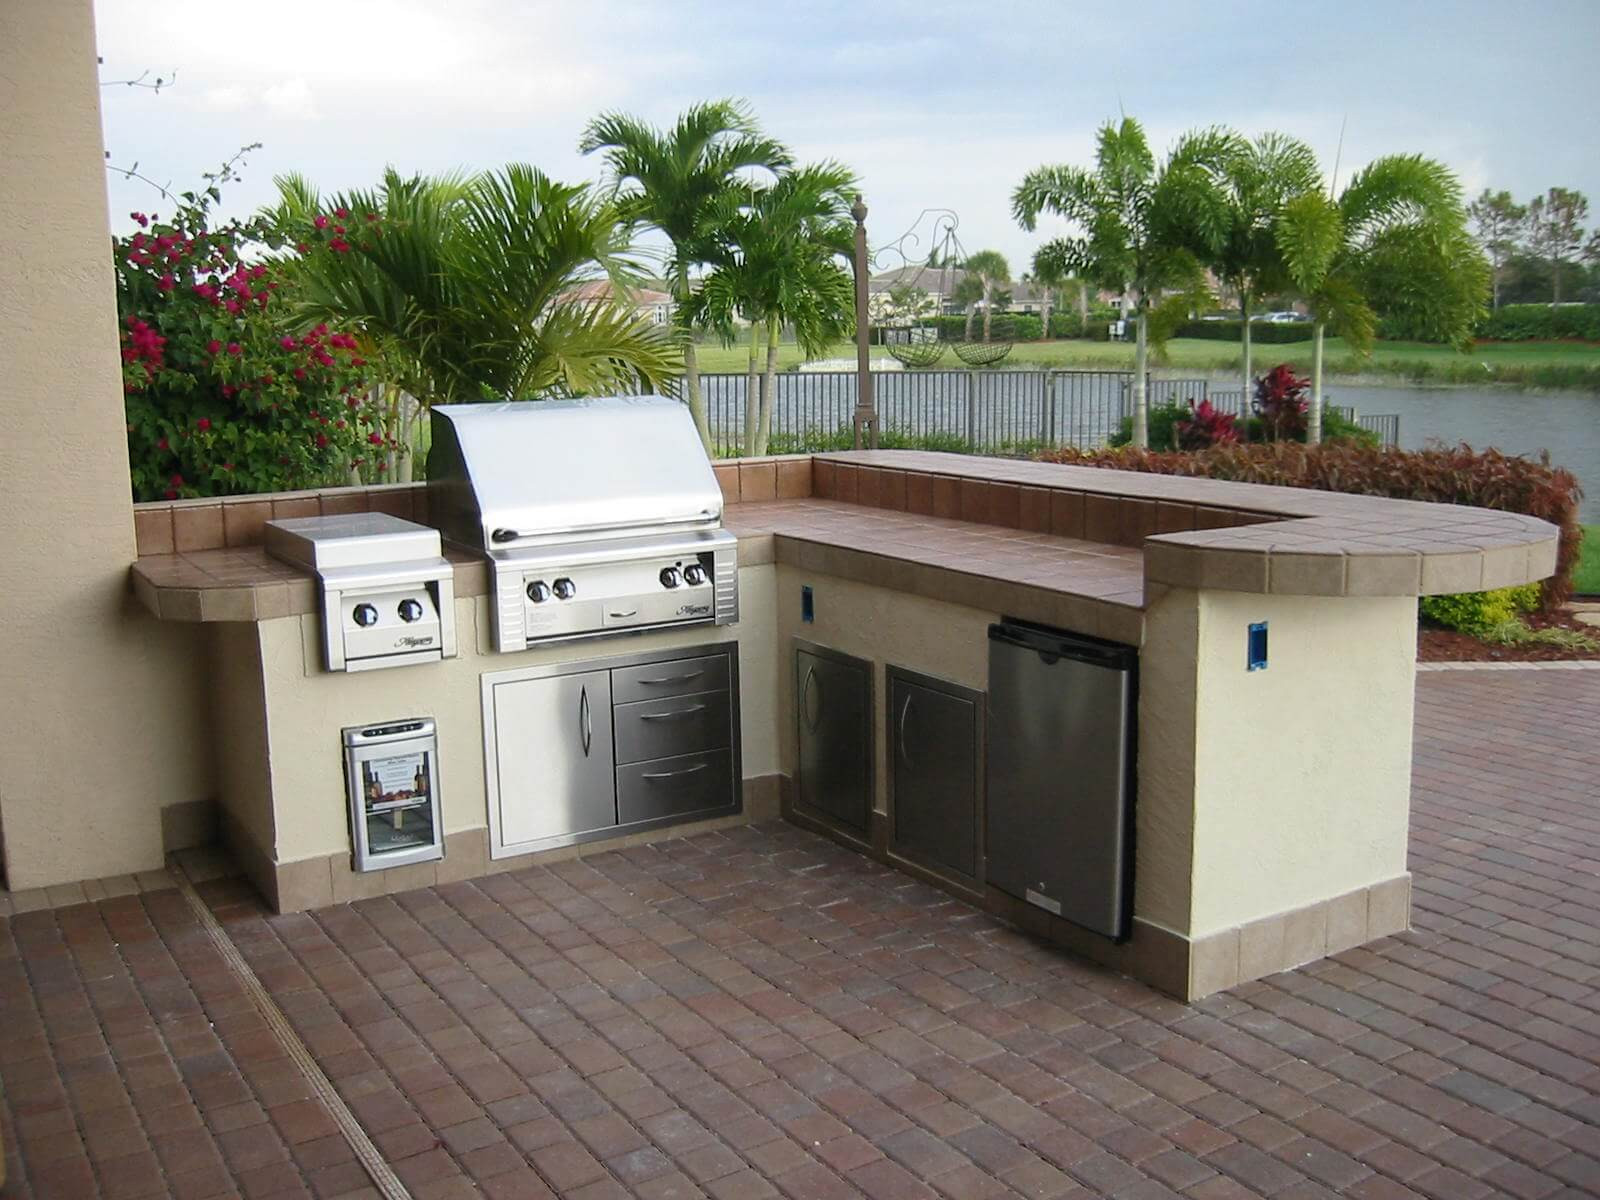 Prefabricated Outdoor Kitchen Kits
 The Best Reason to Choose Prefabricated Outdoor Kitchen